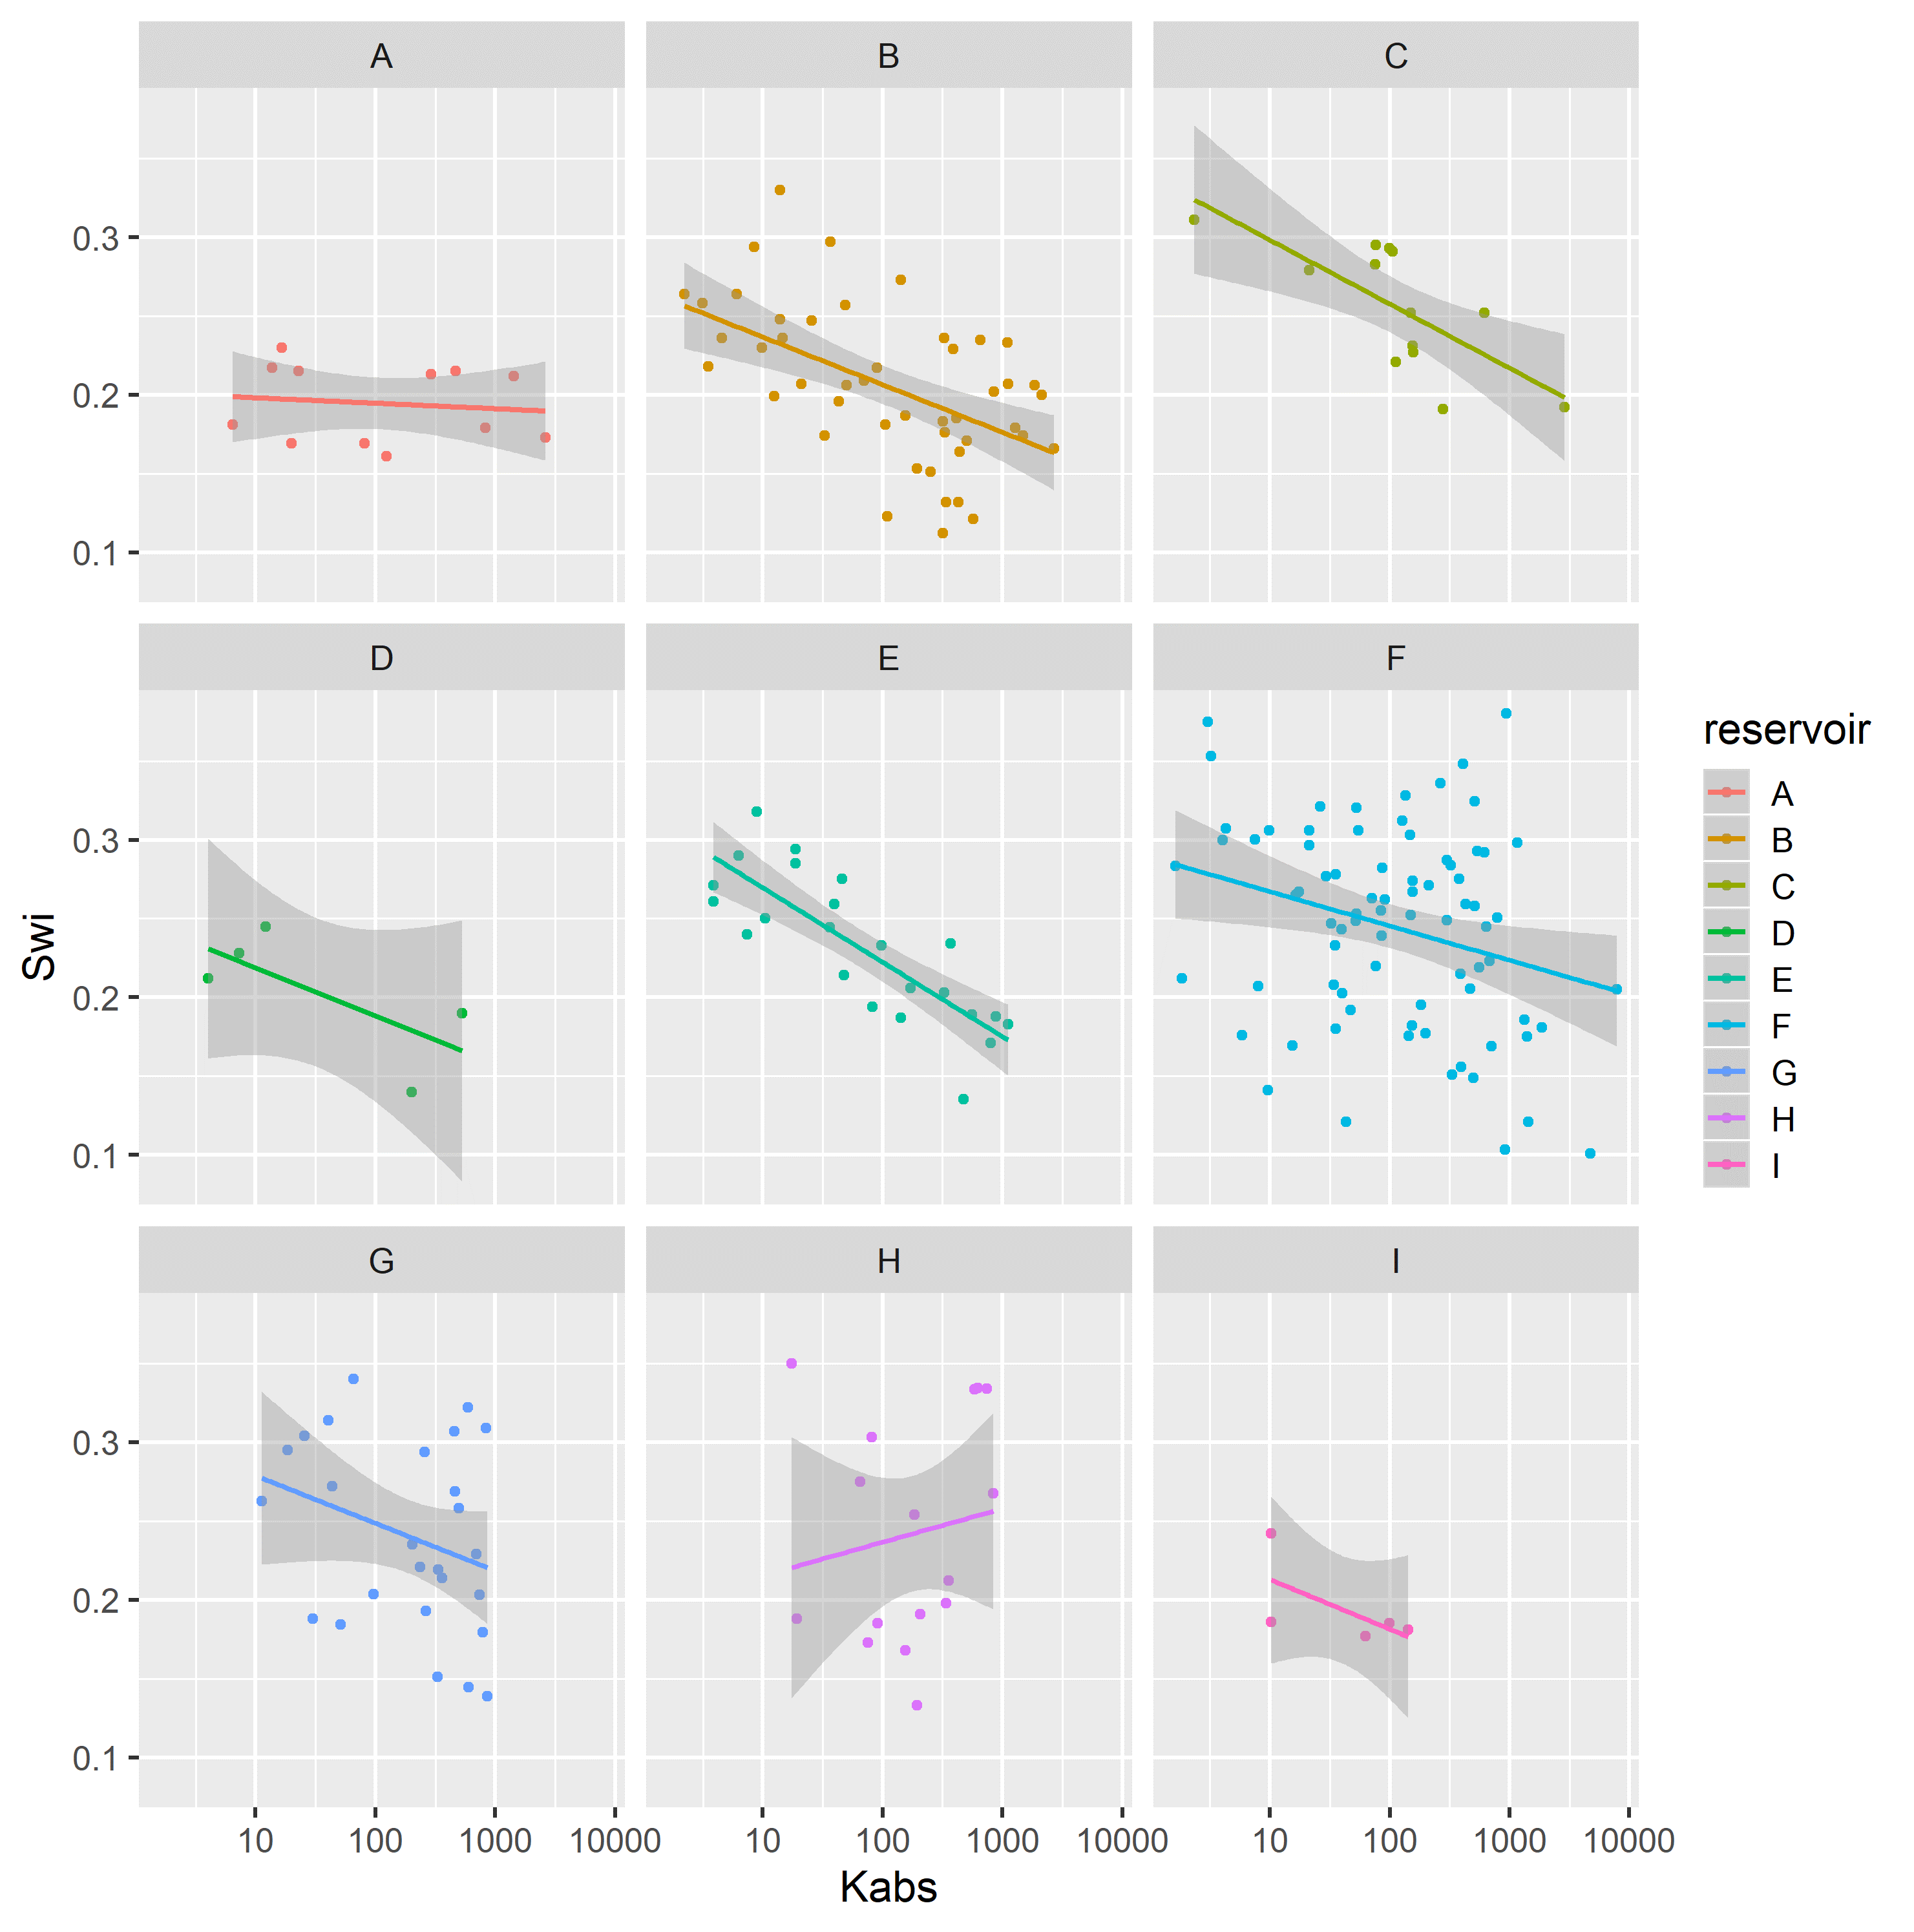 Completely pooled simple linear regression models, grouped by reservoir.